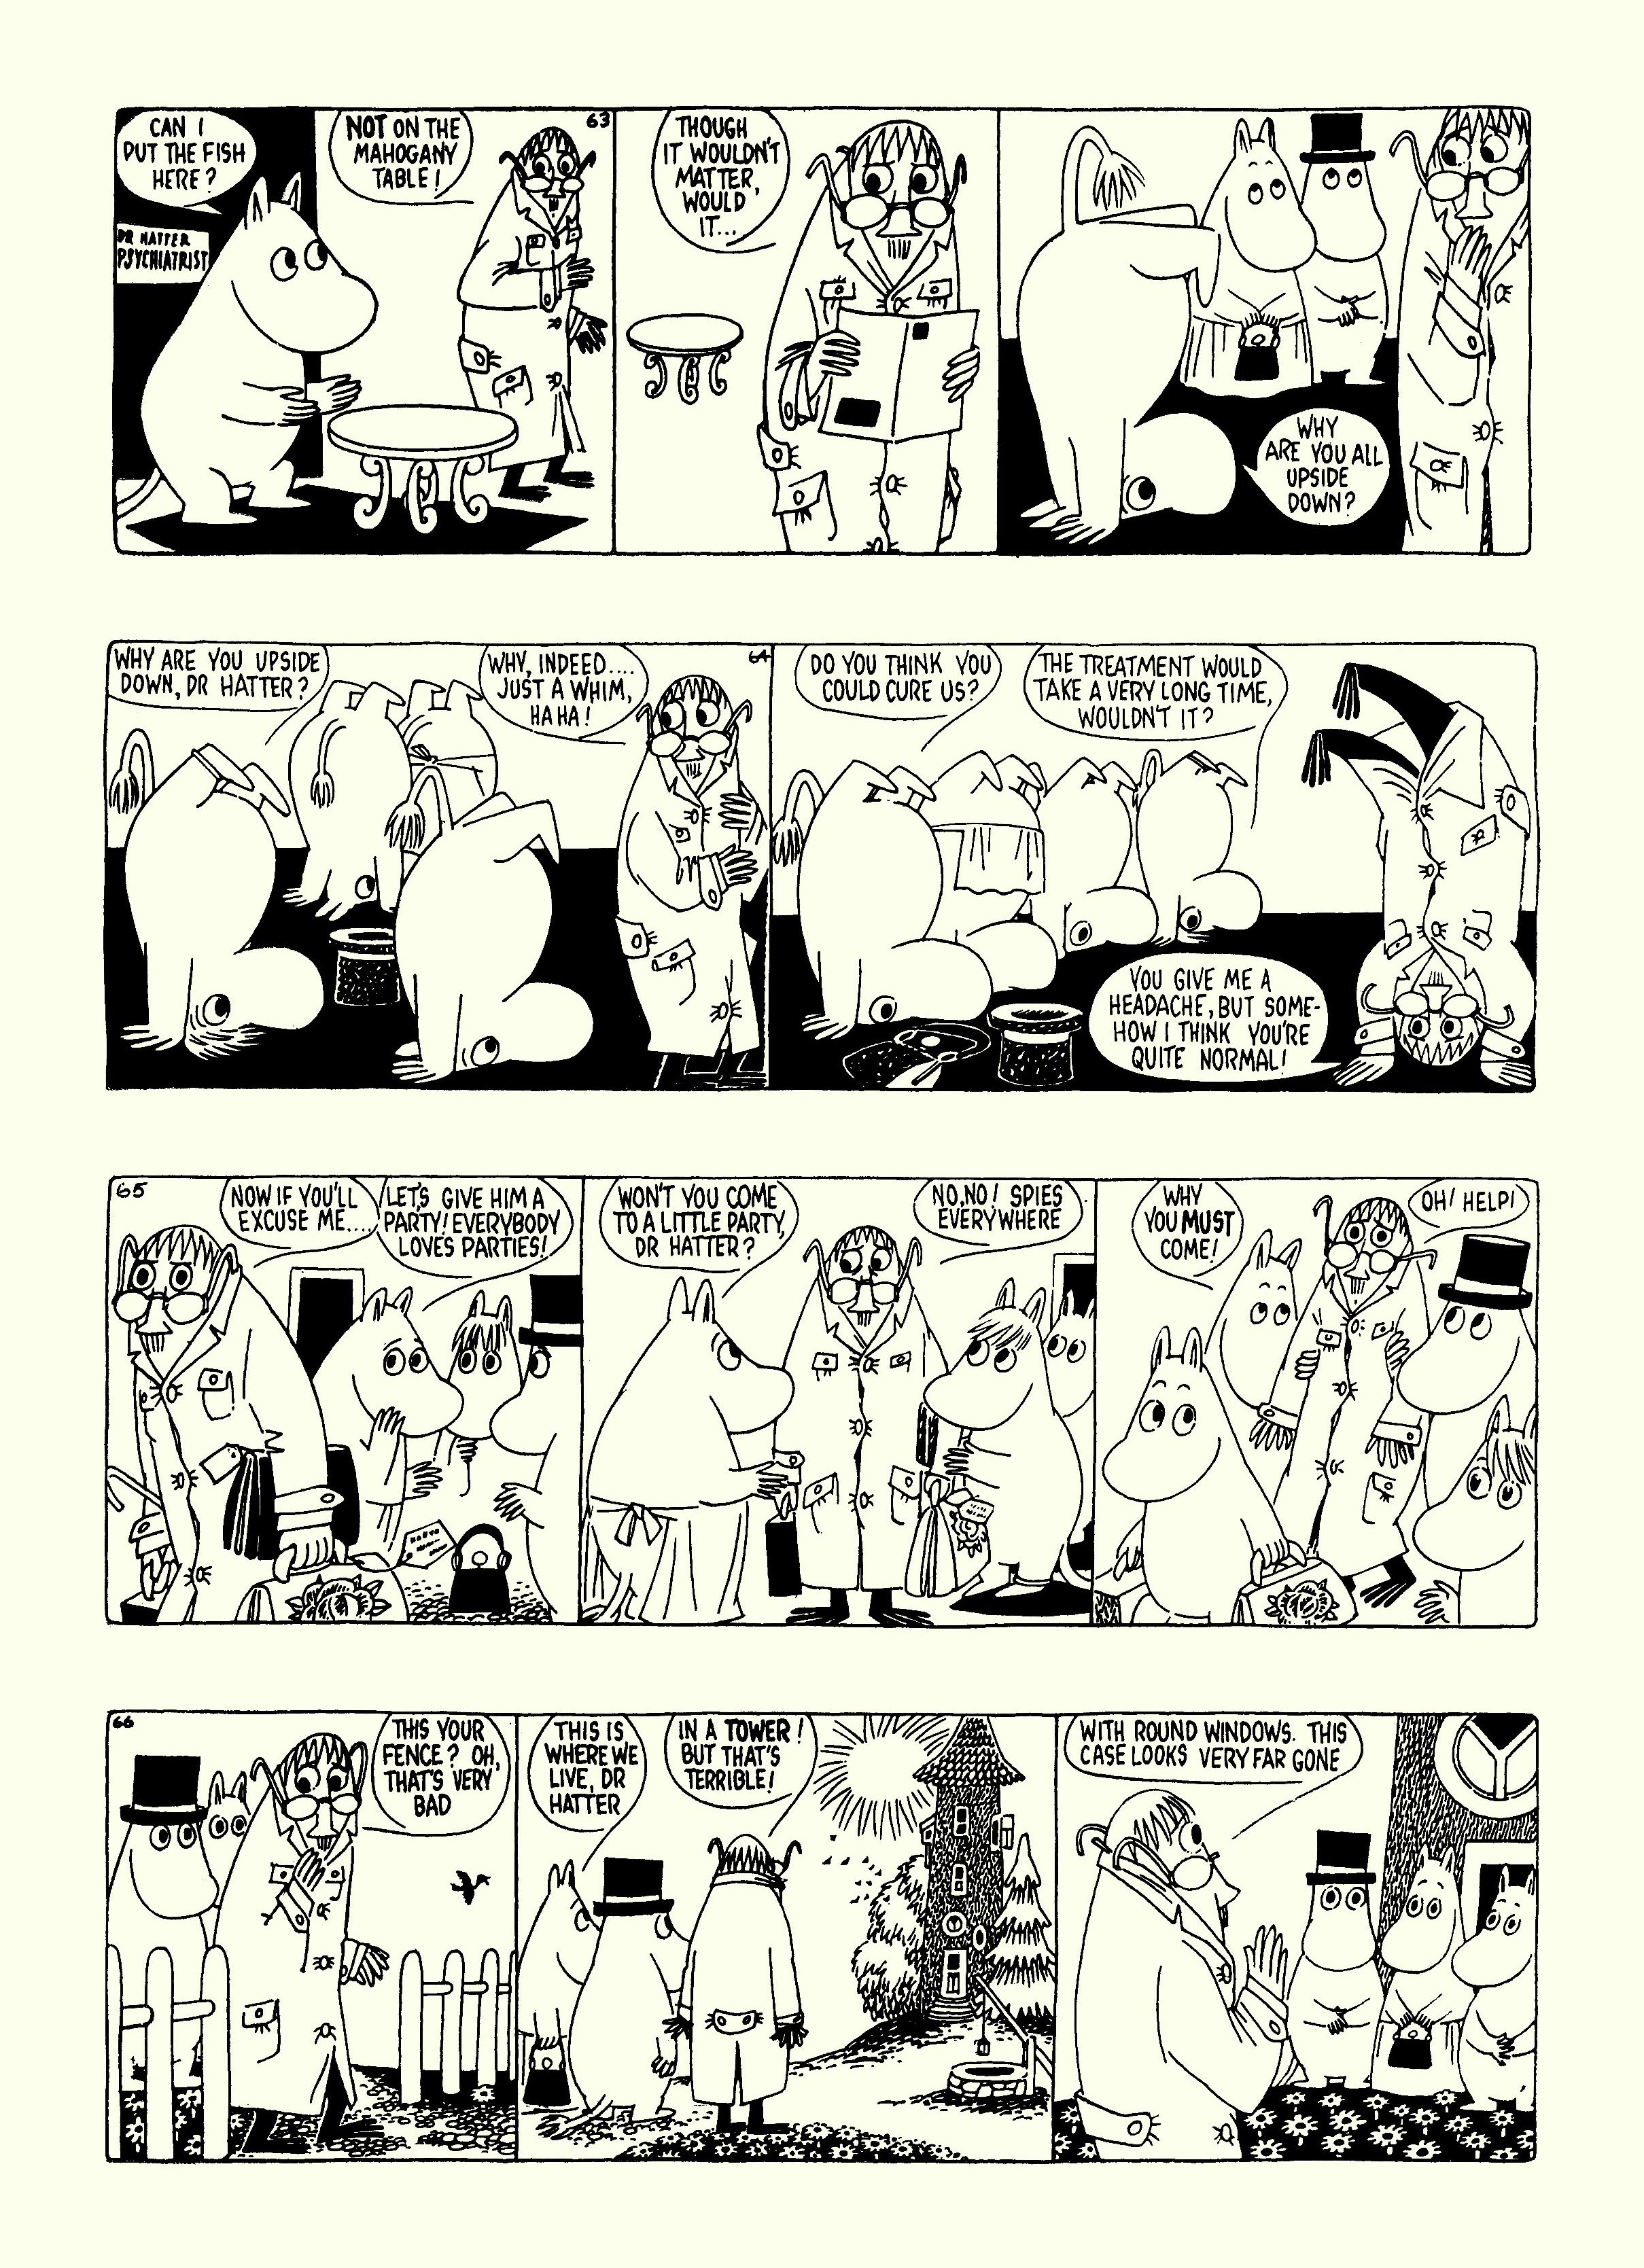 Read online Moomin: The Complete Tove Jansson Comic Strip comic -  Issue # TPB 5 - 73